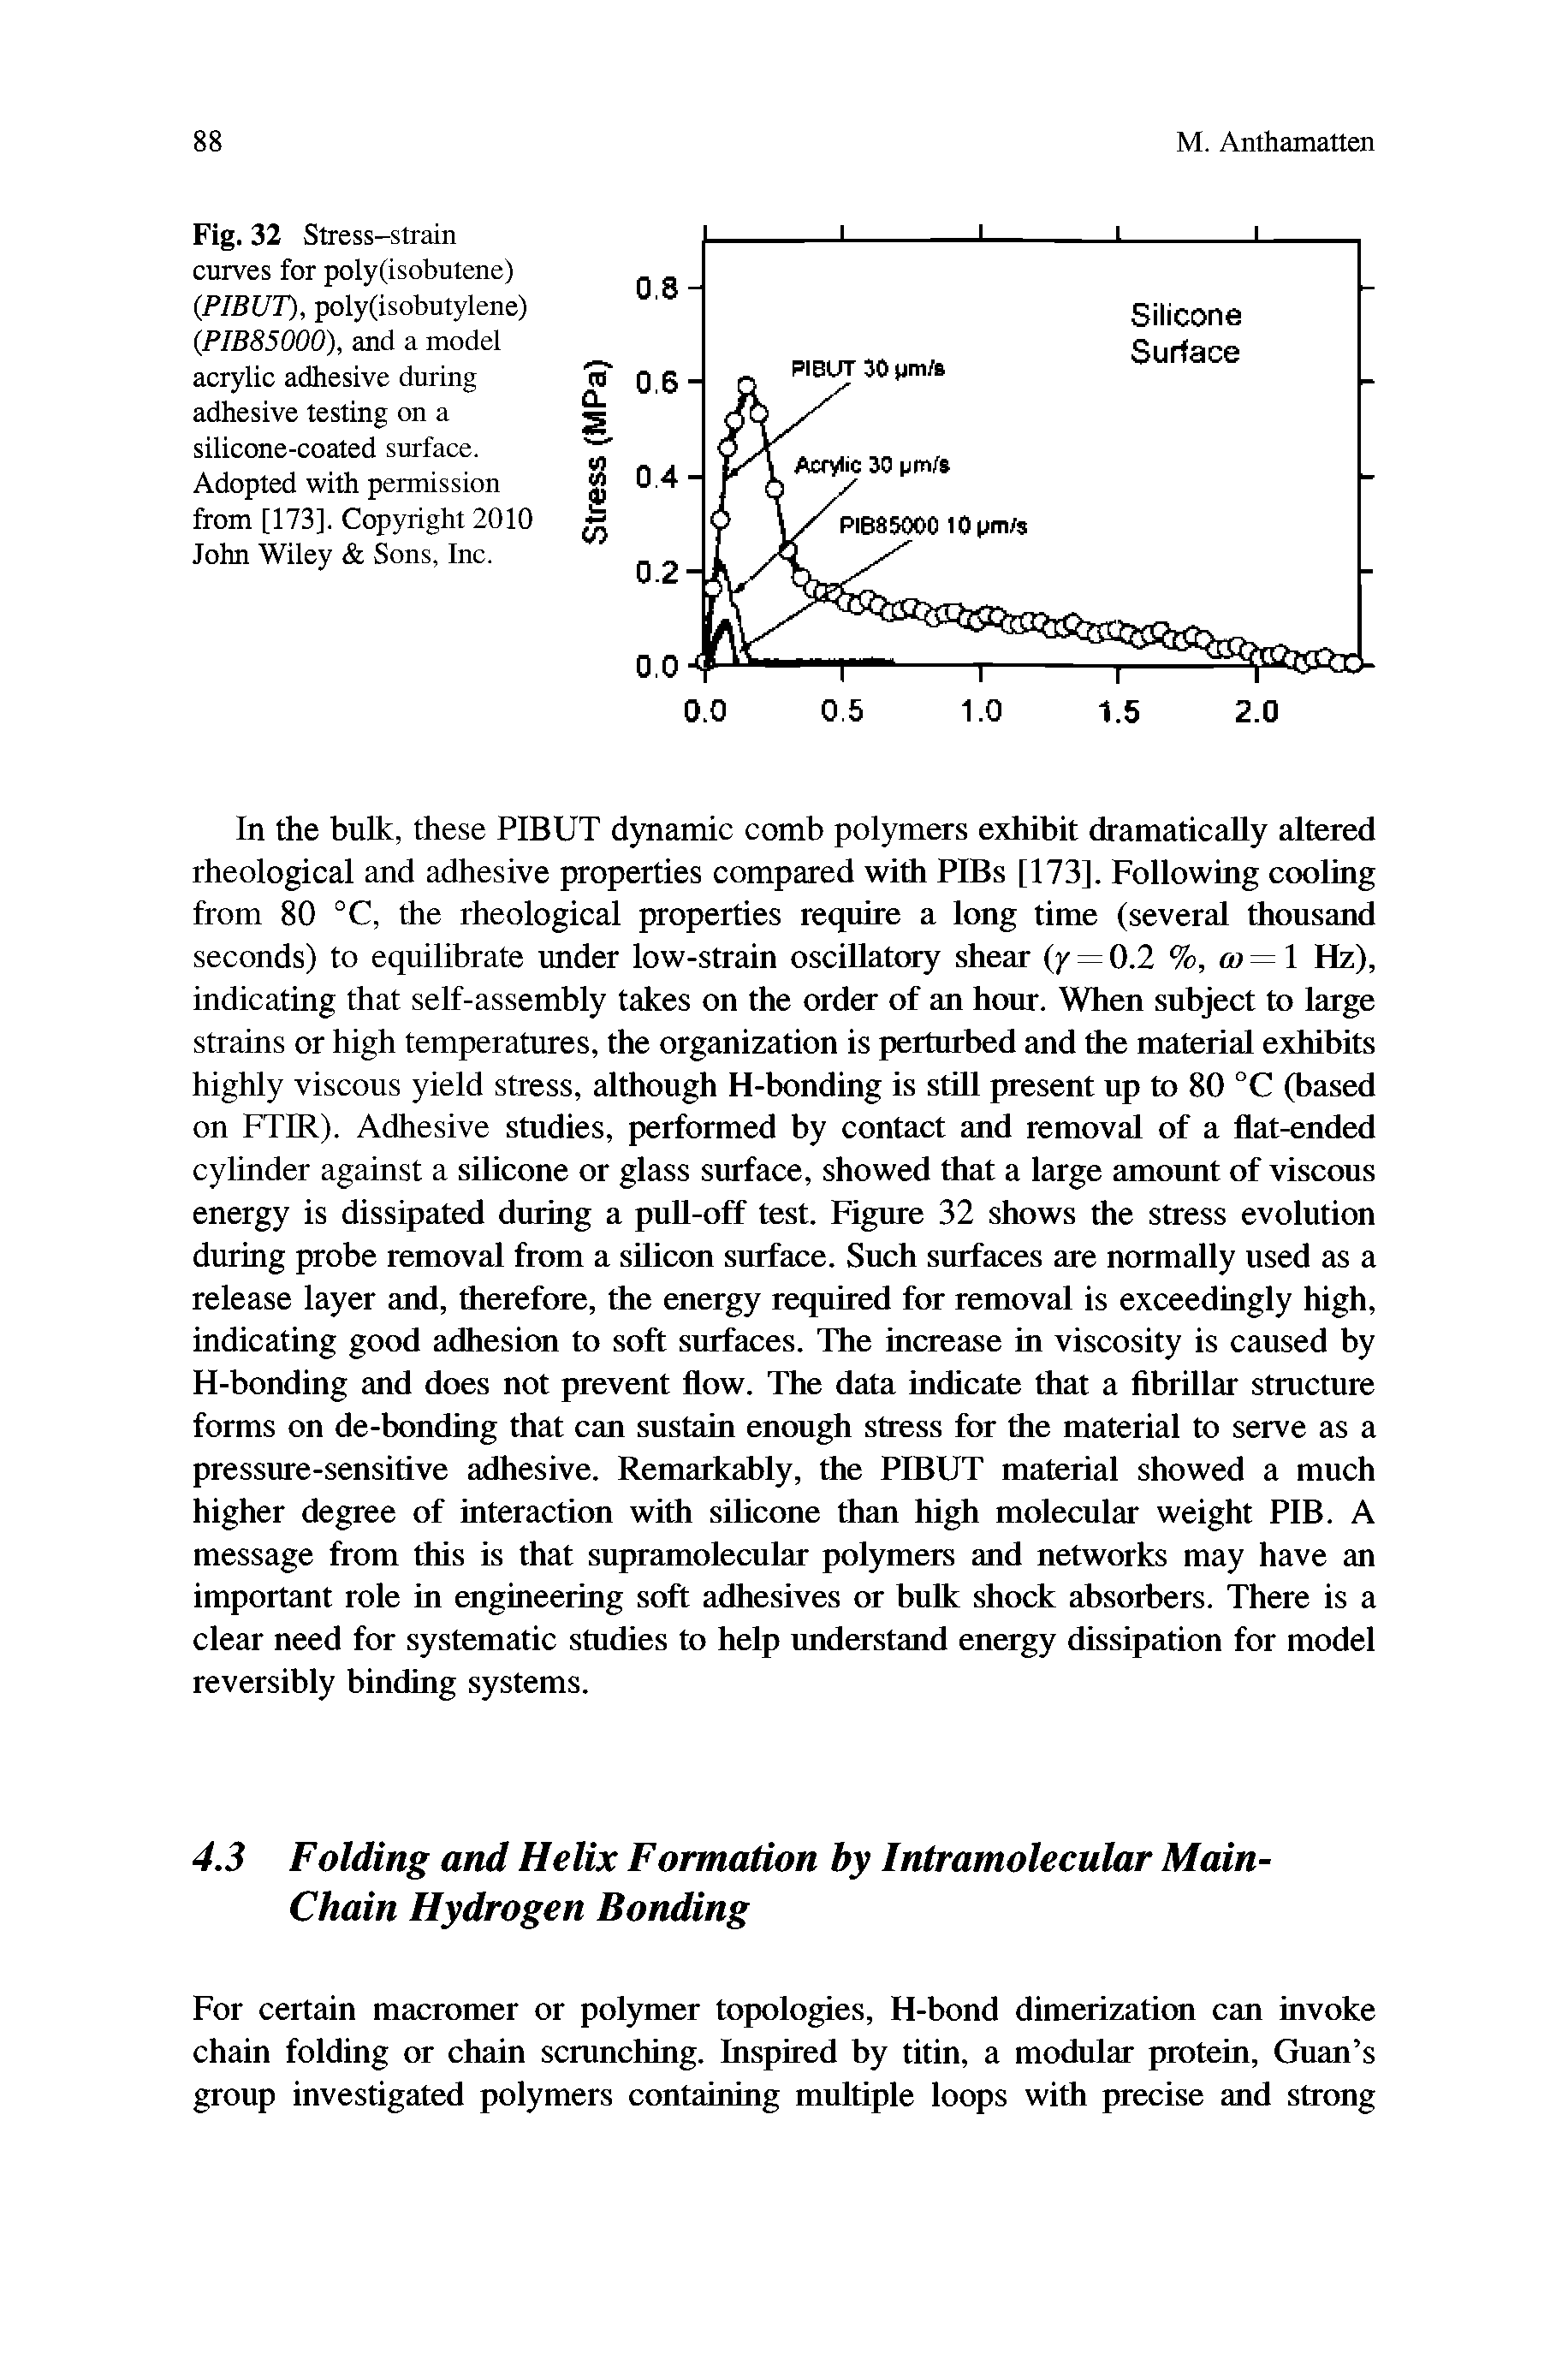 Fig. 32 Stress-strain curves for poly(isobutene) (PIBUT), poly(isobutylene) (PIB85000), and a model acrylic adhesive during adhesive testing on a silicone-coated surface. Adopted with permission from [173]. Copyright 2010 John Wiley Sons, Inc.